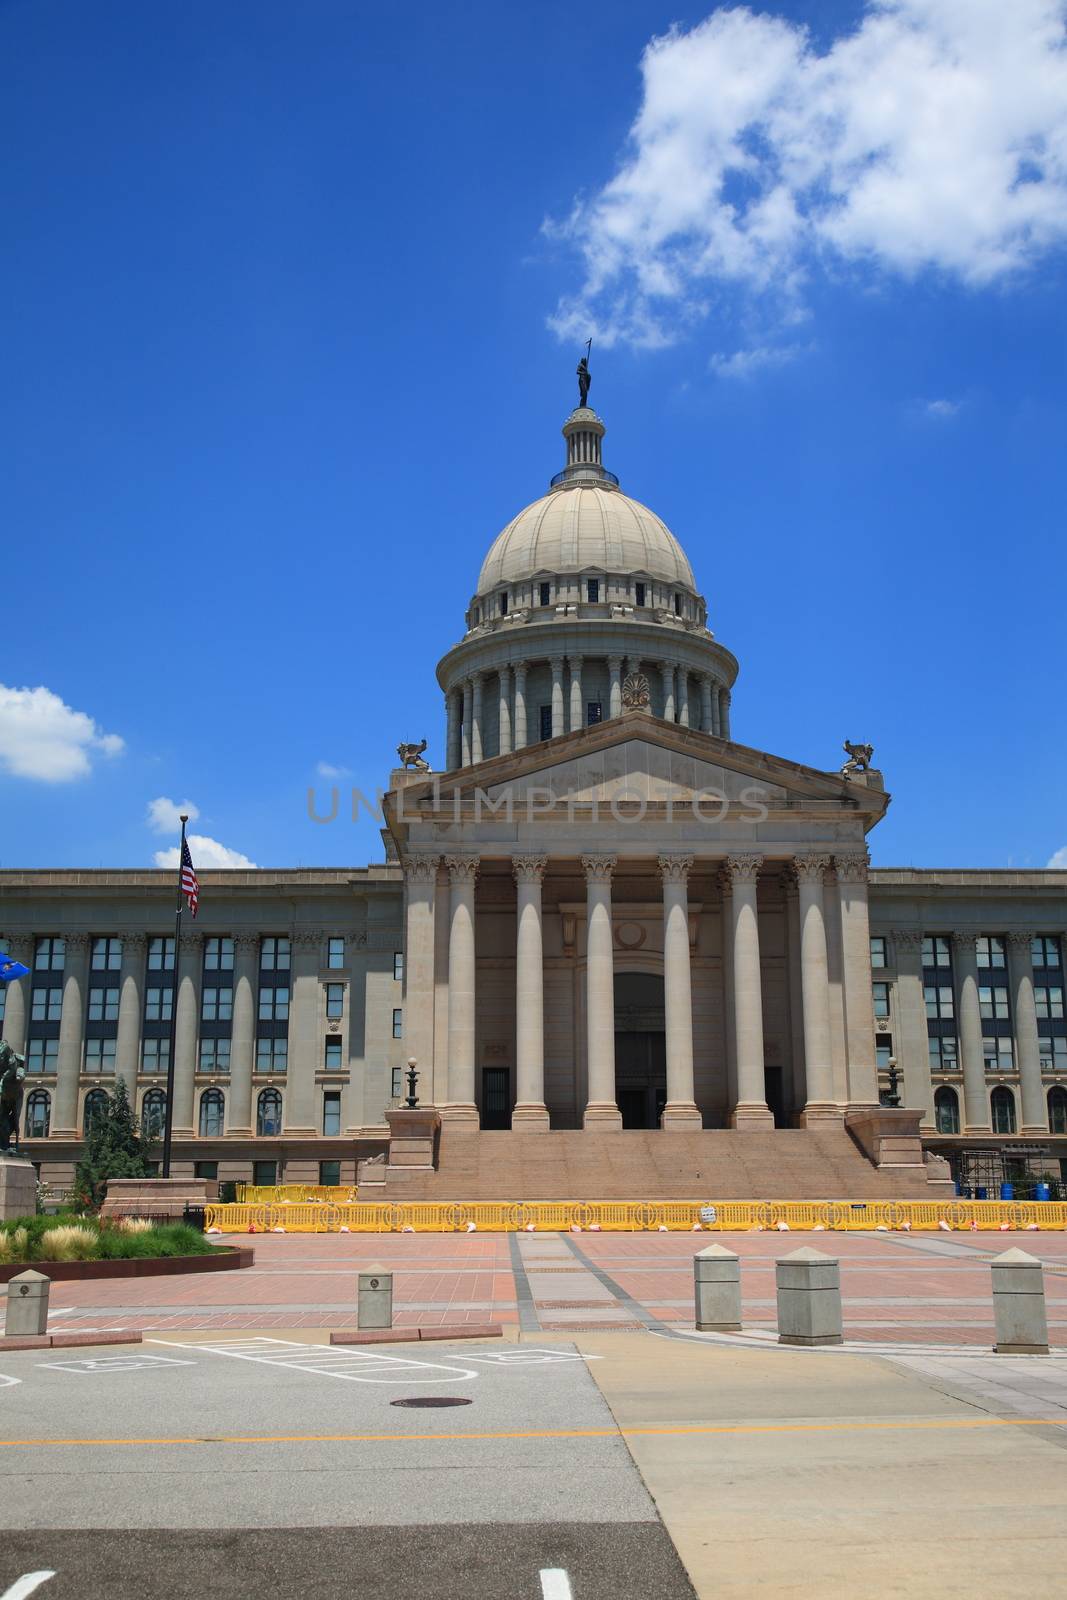 Oklahoma State Capitol Building by Ffooter